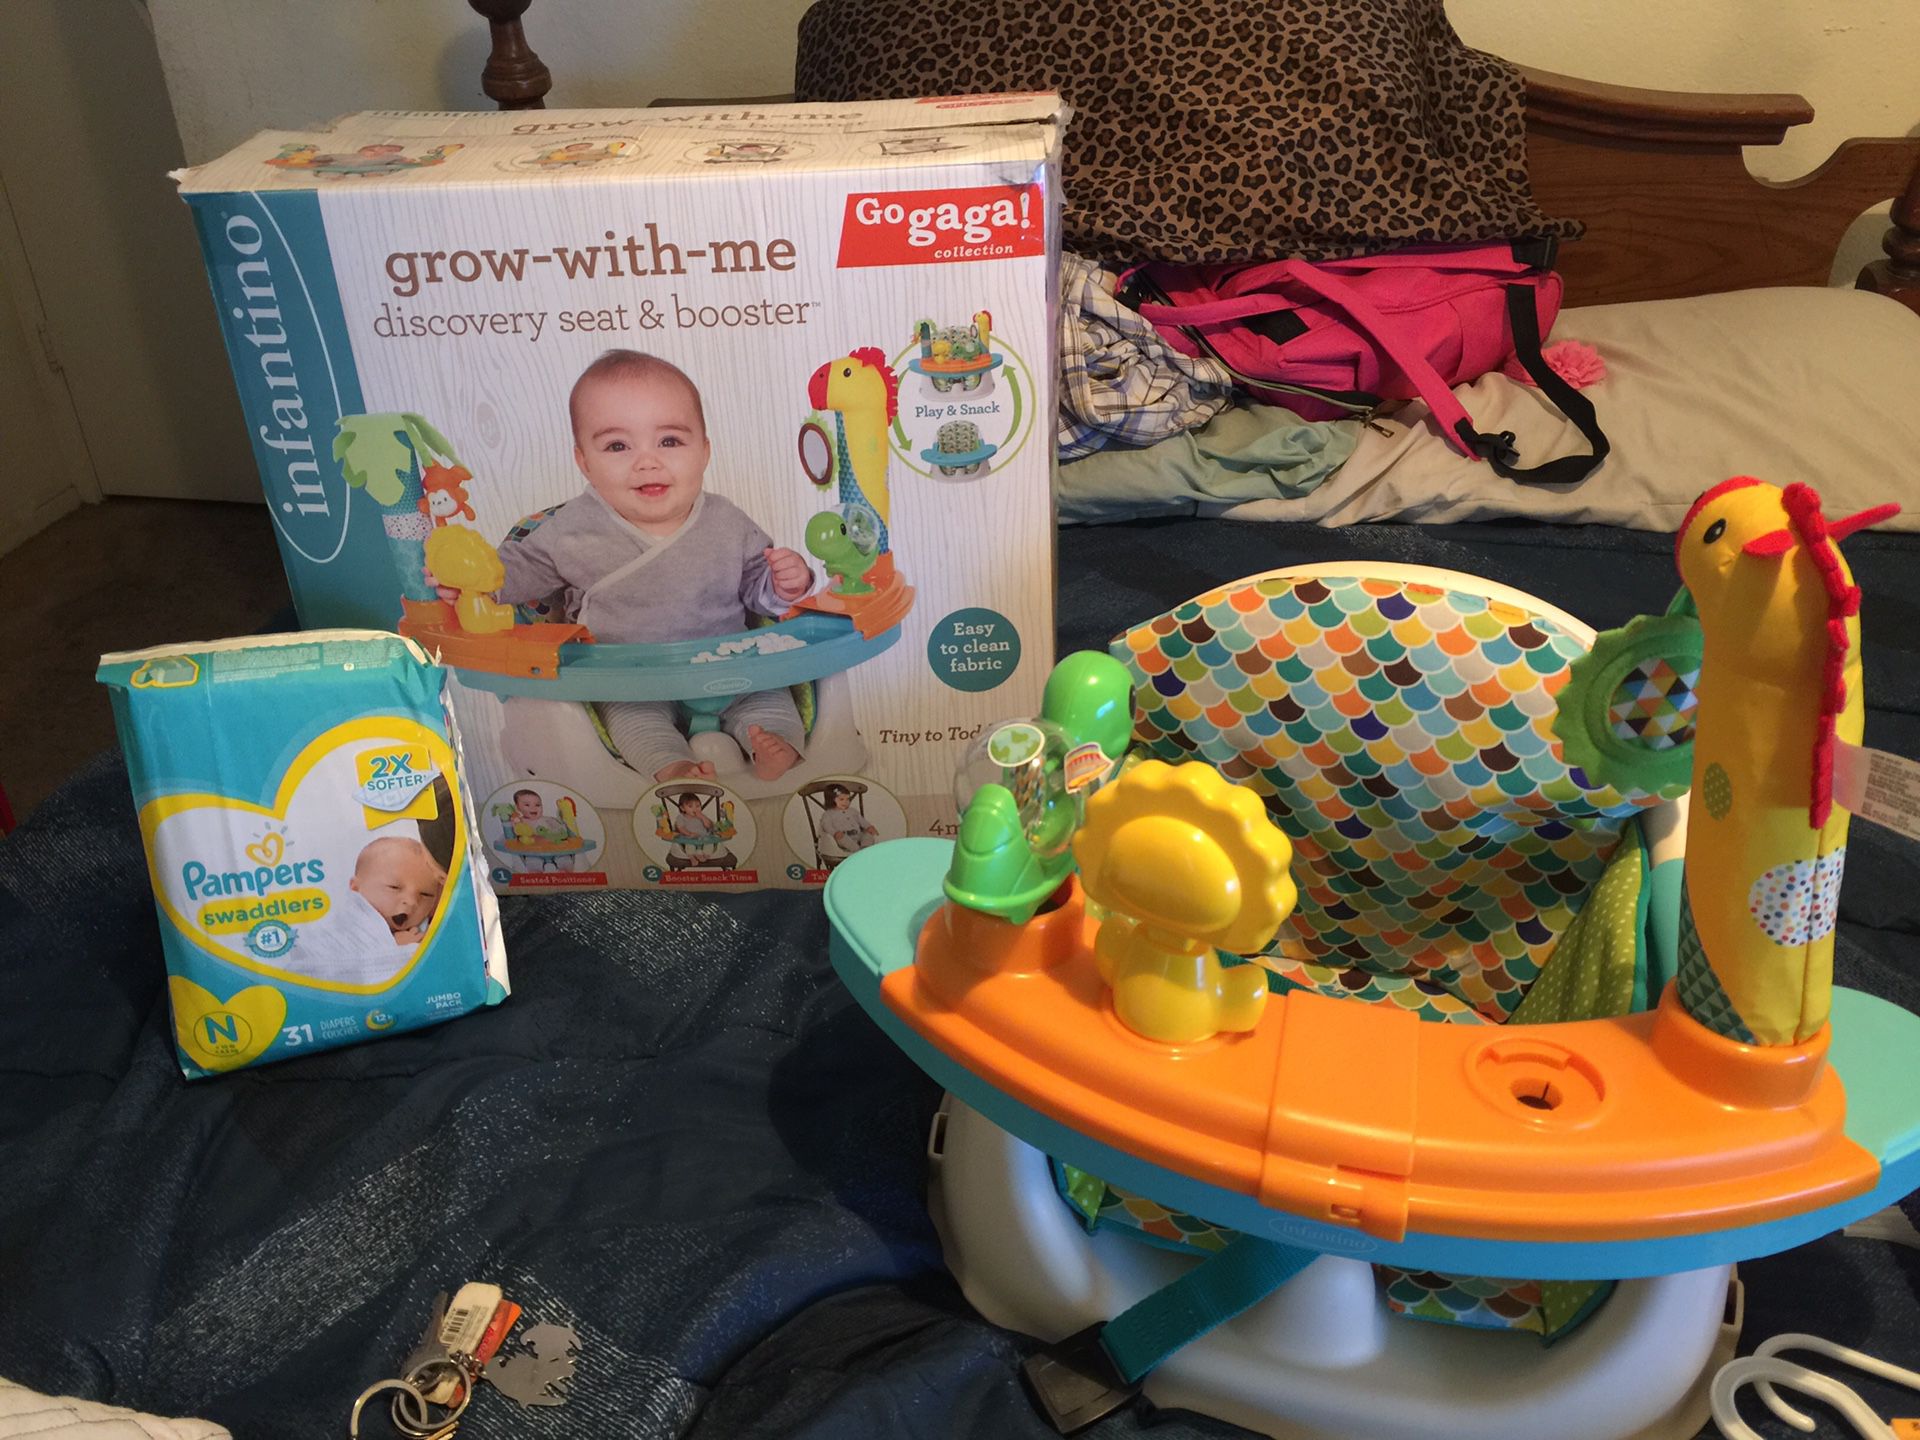 Grow with me seat and booster and newborn diapers